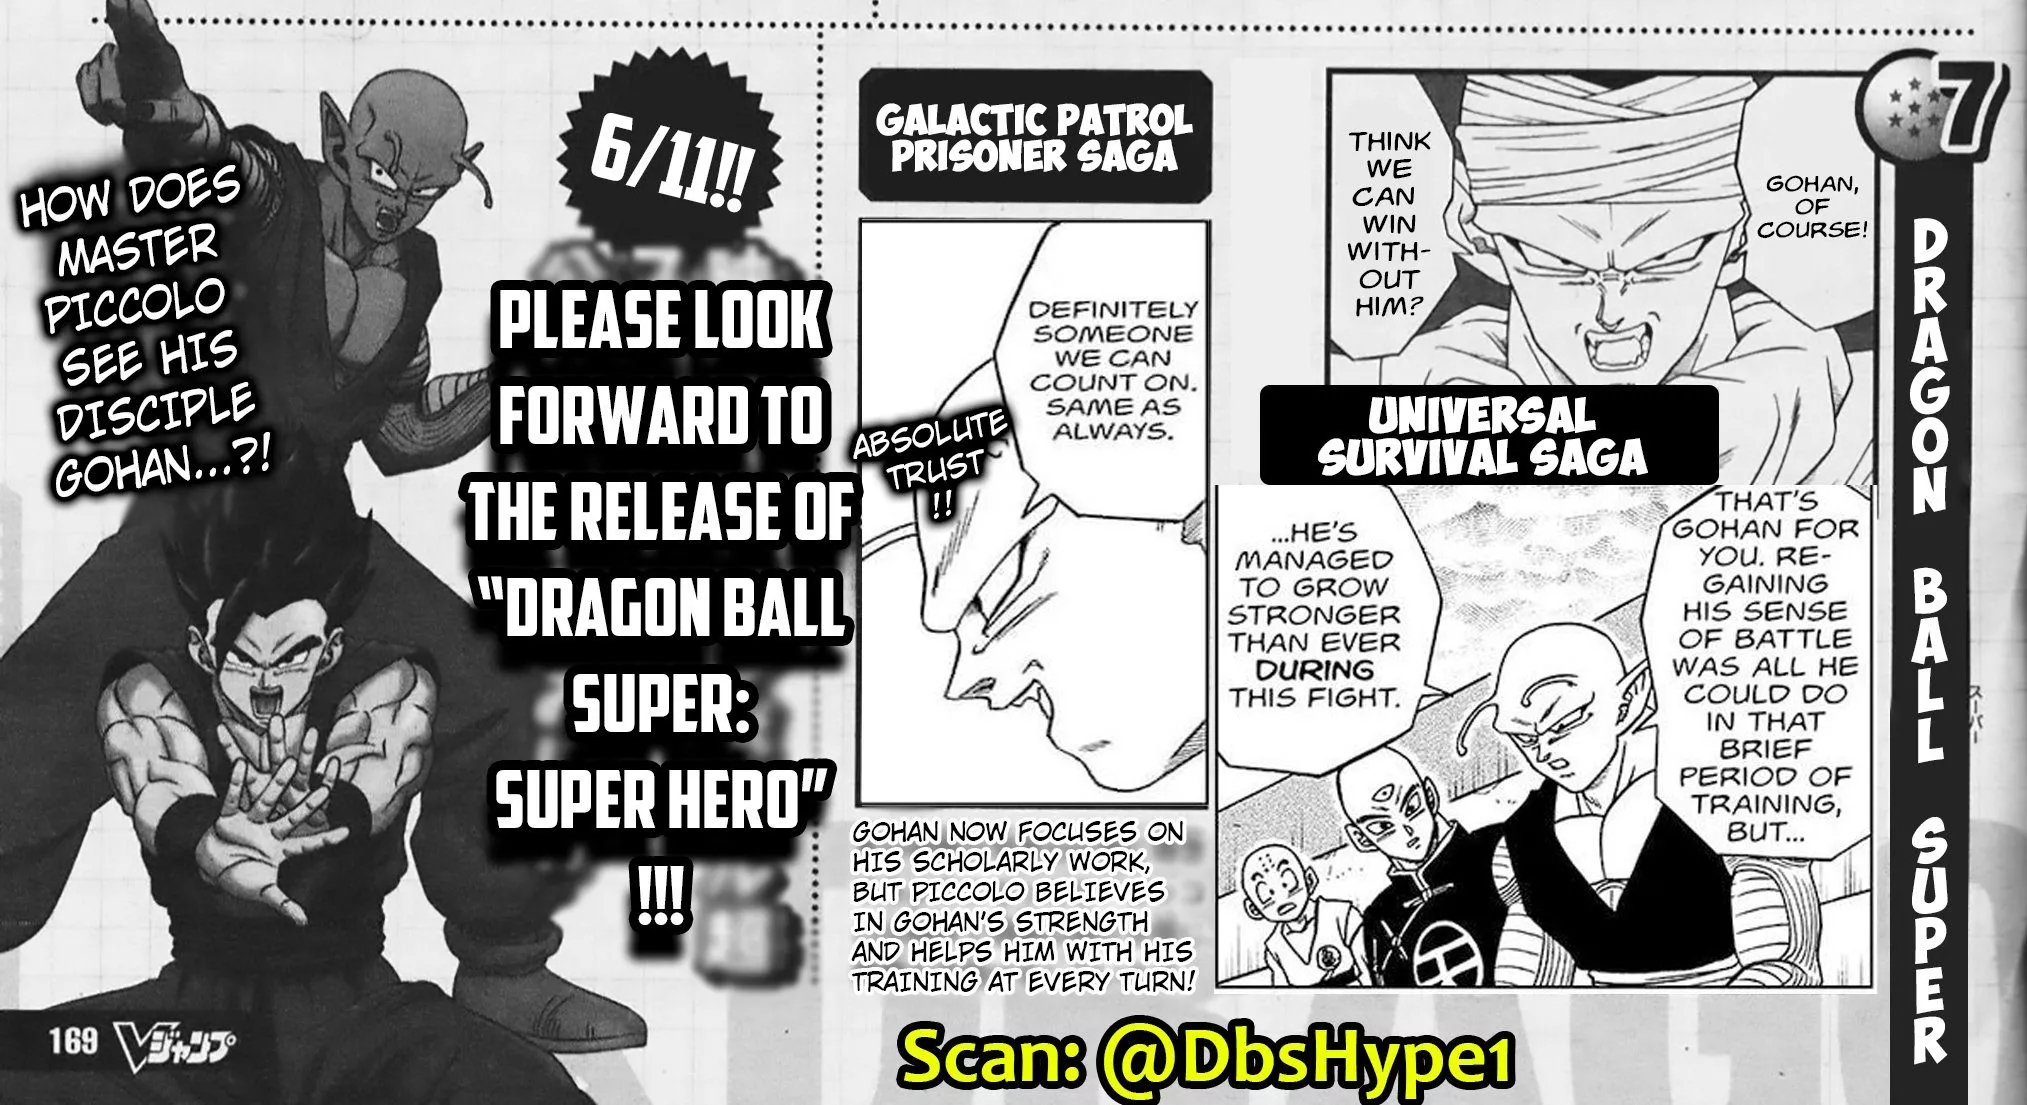 Dragon Ball Super: Super Hero is confirmed to take place after the Moro arc